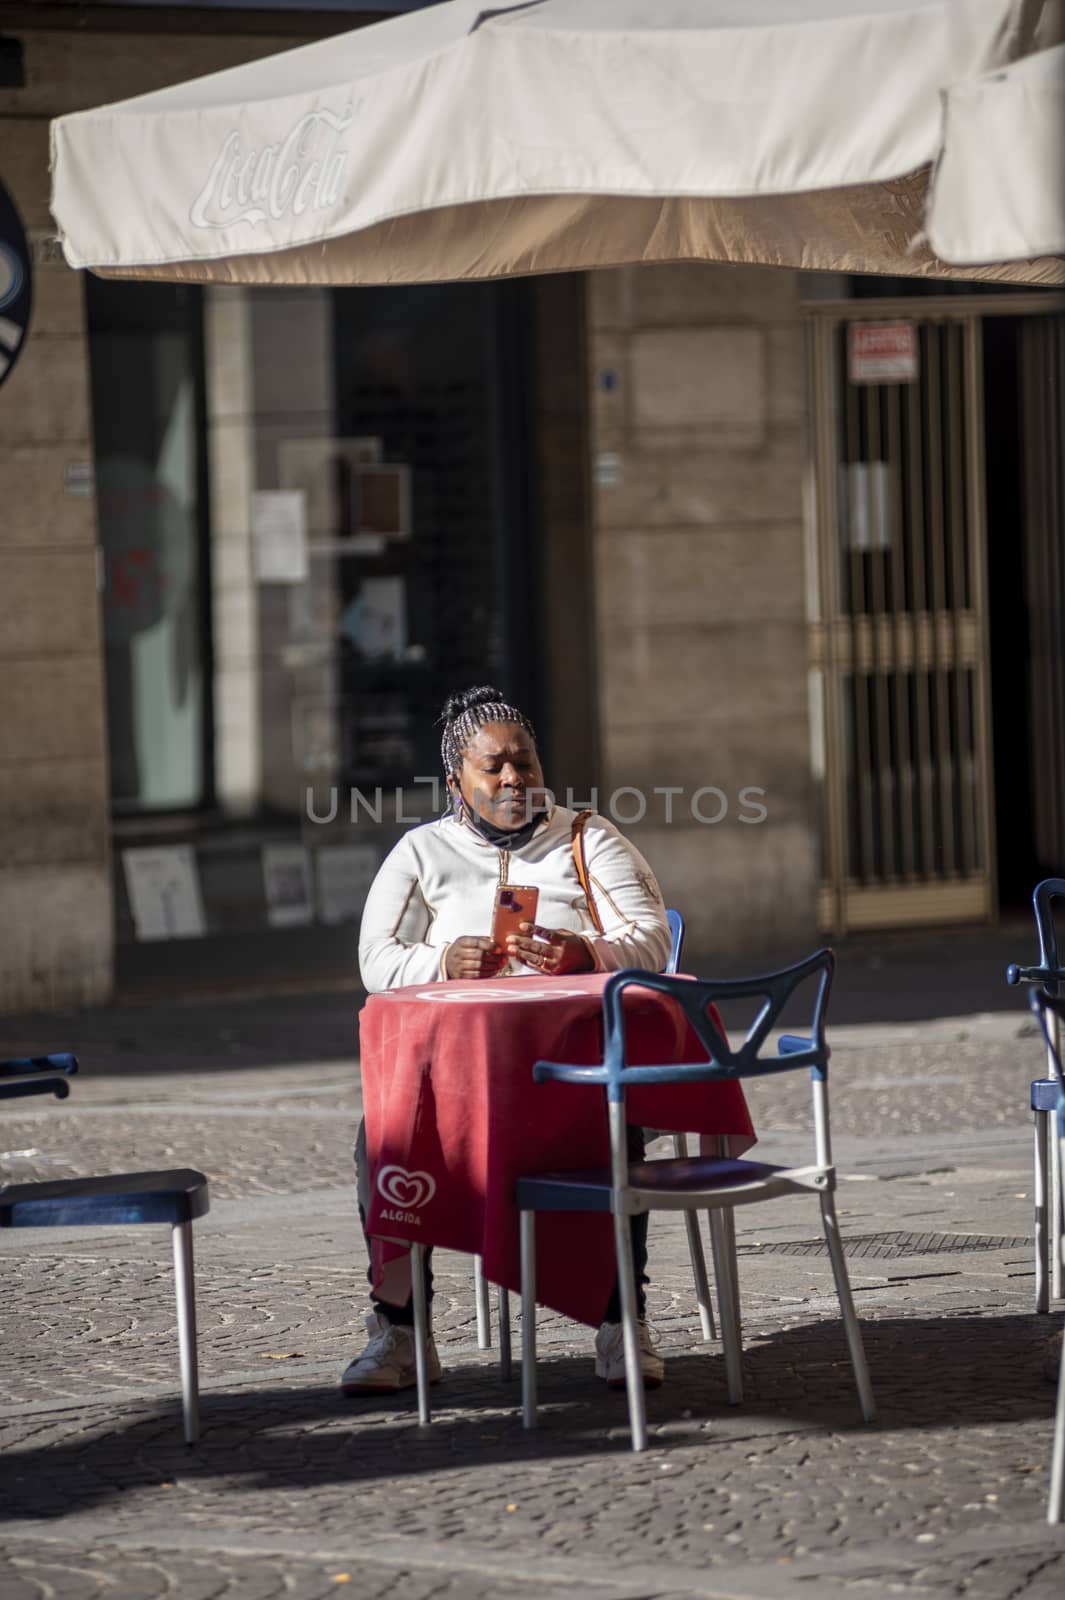 terni,italy october 21 2020:black woman sitting at a table in an outdoor cafe